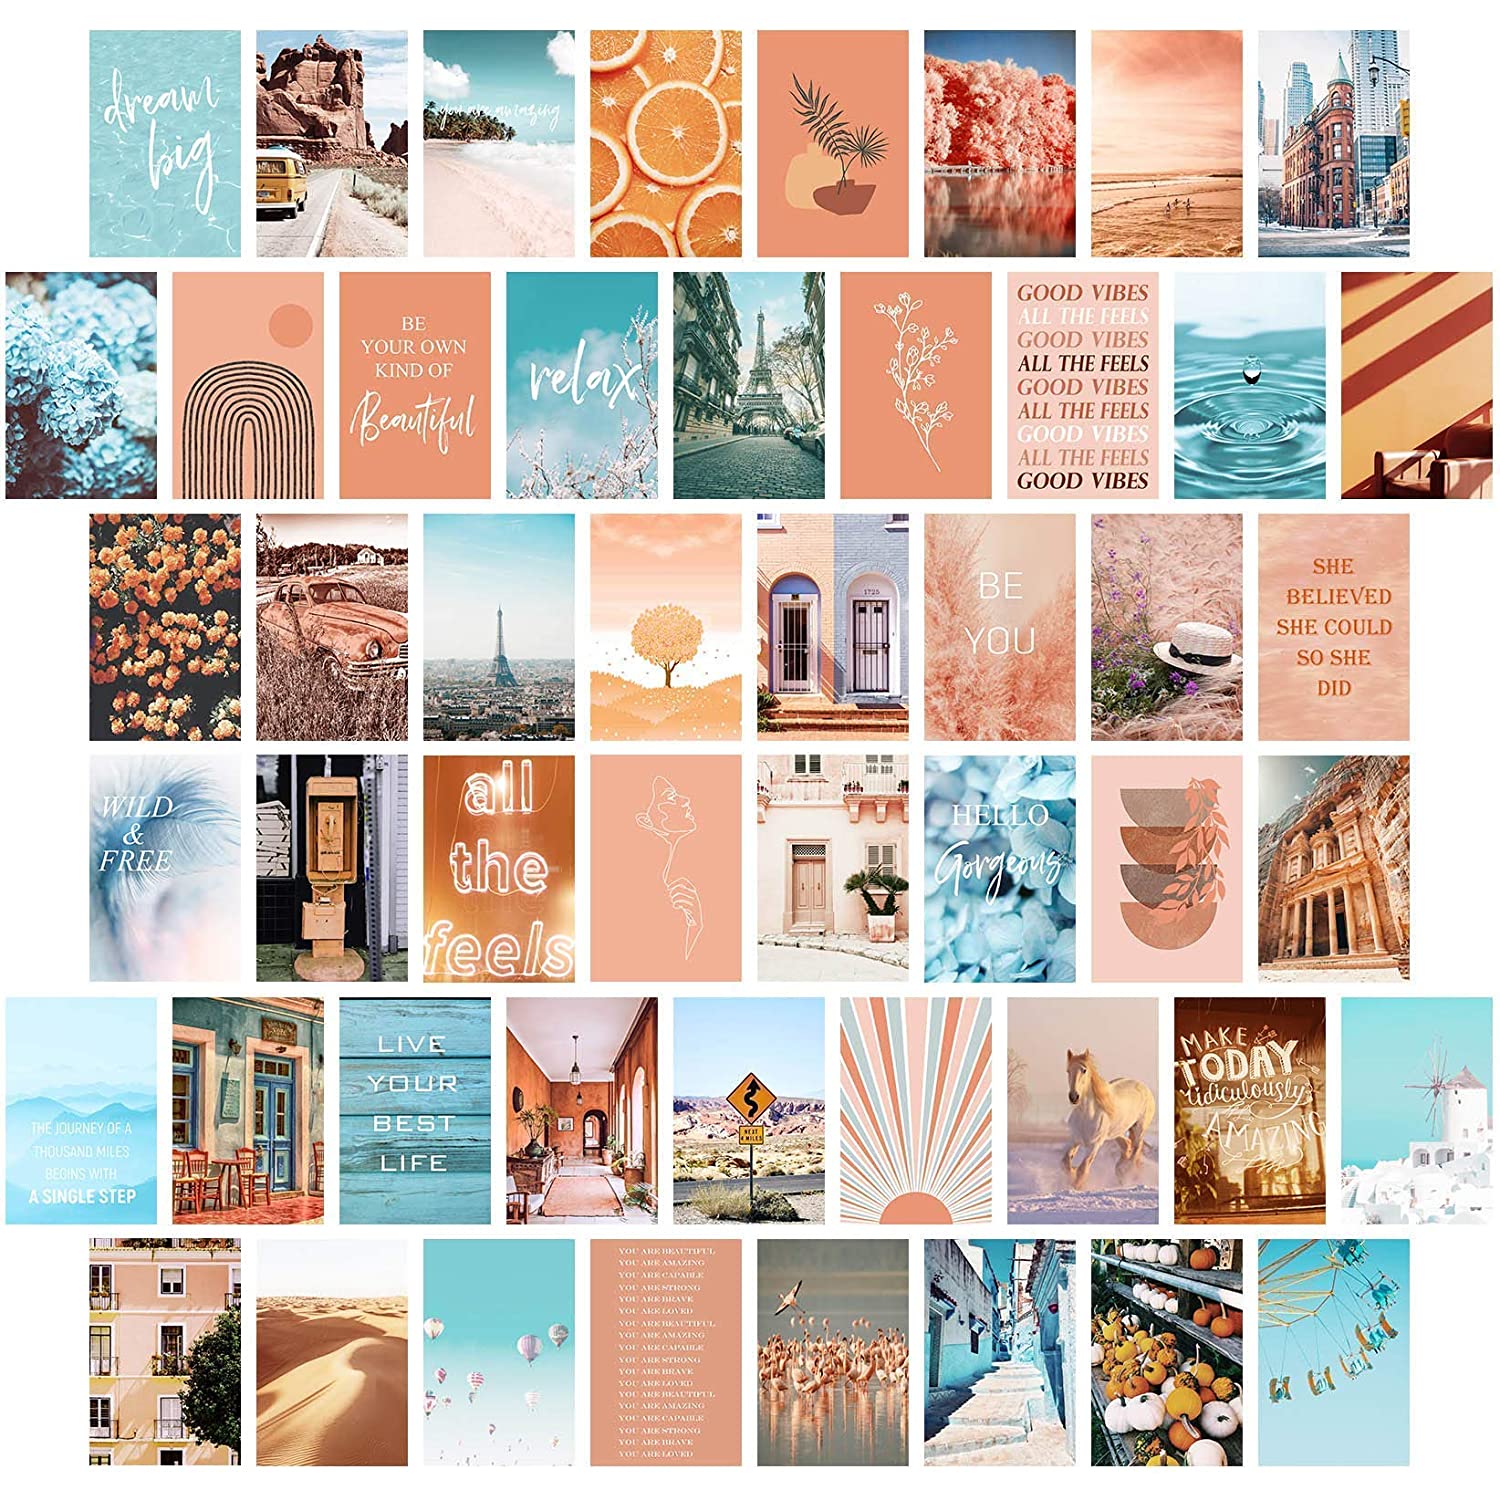 Peach Teal Wall Collage Kit Aesthetic Picture, Bedroom Decor for Teen Girls, Wall Collage Kit, Collage Kit for Wall Aesthetic, Girls Bedroom Decor, Boho Wall Decor, Collage Kit (50PCS 4x6 inch)